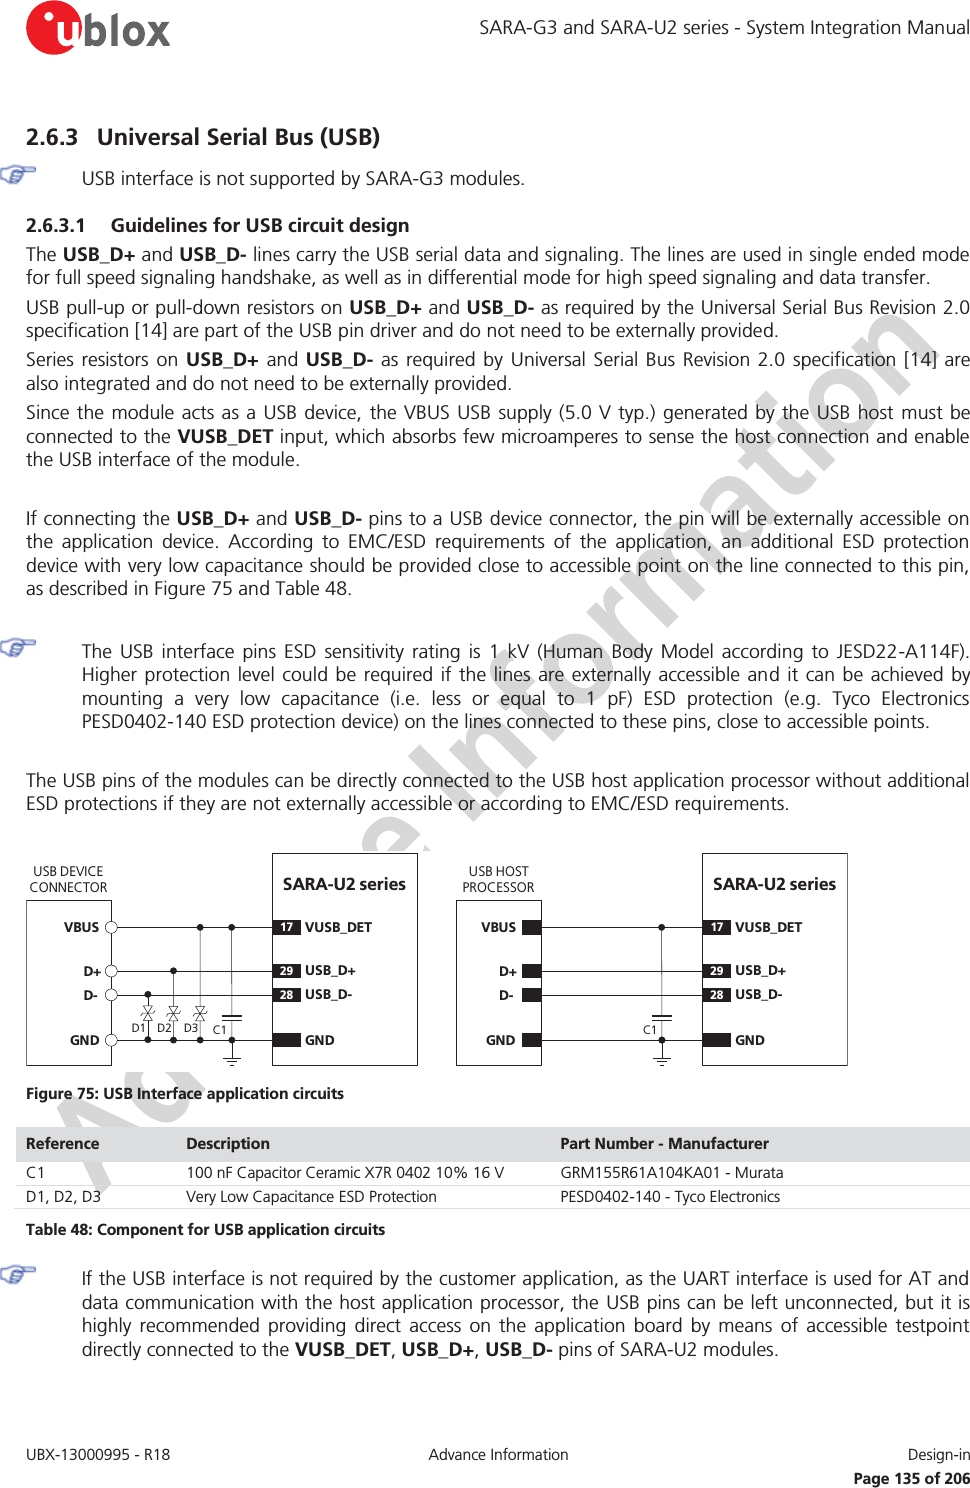 SARA-G3 and SARA-U2 series - System Integration Manual UBX-13000995 - R18  Advance Information  Design-in   Page 135 of 206 2.6.3 Universal Serial Bus (USB)  USB interface is not supported by SARA-G3 modules. 2.6.3.1 Guidelines for USB circuit design The USB_D+ and USB_D- lines carry the USB serial data and signaling. The lines are used in single ended mode for full speed signaling handshake, as well as in differential mode for high speed signaling and data transfer. USB pull-up or pull-down resistors on USB_D+ and USB_D- as required by the Universal Serial Bus Revision 2.0 specification [14] are part of the USB pin driver and do not need to be externally provided. Series resistors on USB_D+ and USB_D- as required by Universal Serial Bus Revision 2.0 specification [14] are also integrated and do not need to be externally provided. Since the module acts as a USB device, the VBUS USB supply (5.0 V typ.) generated by the USB host must be connected to the VUSB_DET input, which absorbs few microamperes to sense the host connection and enable the USB interface of the module.  If connecting the USB_D+ and USB_D- pins to a USB device connector, the pin will be externally accessible on the application device. According to EMC/ESD requirements of the application, an additional ESD protection device with very low capacitance should be provided close to accessible point on the line connected to this pin, as described in Figure 75 and Table 48.   The USB interface pins ESD sensitivity rating is 1 kV (Human Body Model according to JESD22-A114F). Higher protection level could be required if the lines are externally accessible and it can be achieved by mounting a very low capacitance (i.e. less or equal to 1 pF) ESD protection (e.g. Tyco Electronics PESD0402-140 ESD protection device) on the lines connected to these pins, close to accessible points.  The USB pins of the modules can be directly connected to the USB host application processor without additional ESD protections if they are not externally accessible or according to EMC/ESD requirements.  SARA-U2 series D+D-GND29USB_D+28 USB_D-GNDUSB DEVICE CONNECTORD1 D2VBUSSARA-U2 series D+D-GND29USB_D+28 USB_D-GNDUSB HOST PROCESSORC117VUSB_DETC117VUSB_DETVBUSD3 Figure 75: USB Interface application circuits Reference  Description  Part Number - Manufacturer C1 100 nF Capacitor Ceramic X7R 0402 10% 16 V GRM155R61A104KA01 - Murata D1, D2, D3 Very Low Capacitance ESD Protection PESD0402-140 - Tyco Electronics  Table 48: Component for USB application circuits  If the USB interface is not required by the customer application, as the UART interface is used for AT and data communication with the host application processor, the USB pins can be left unconnected, but it is highly recommended providing direct access on the application board by means of accessible testpoint directly connected to the VUSB_DET, USB_D+, USB_D- pins of SARA-U2 modules. 